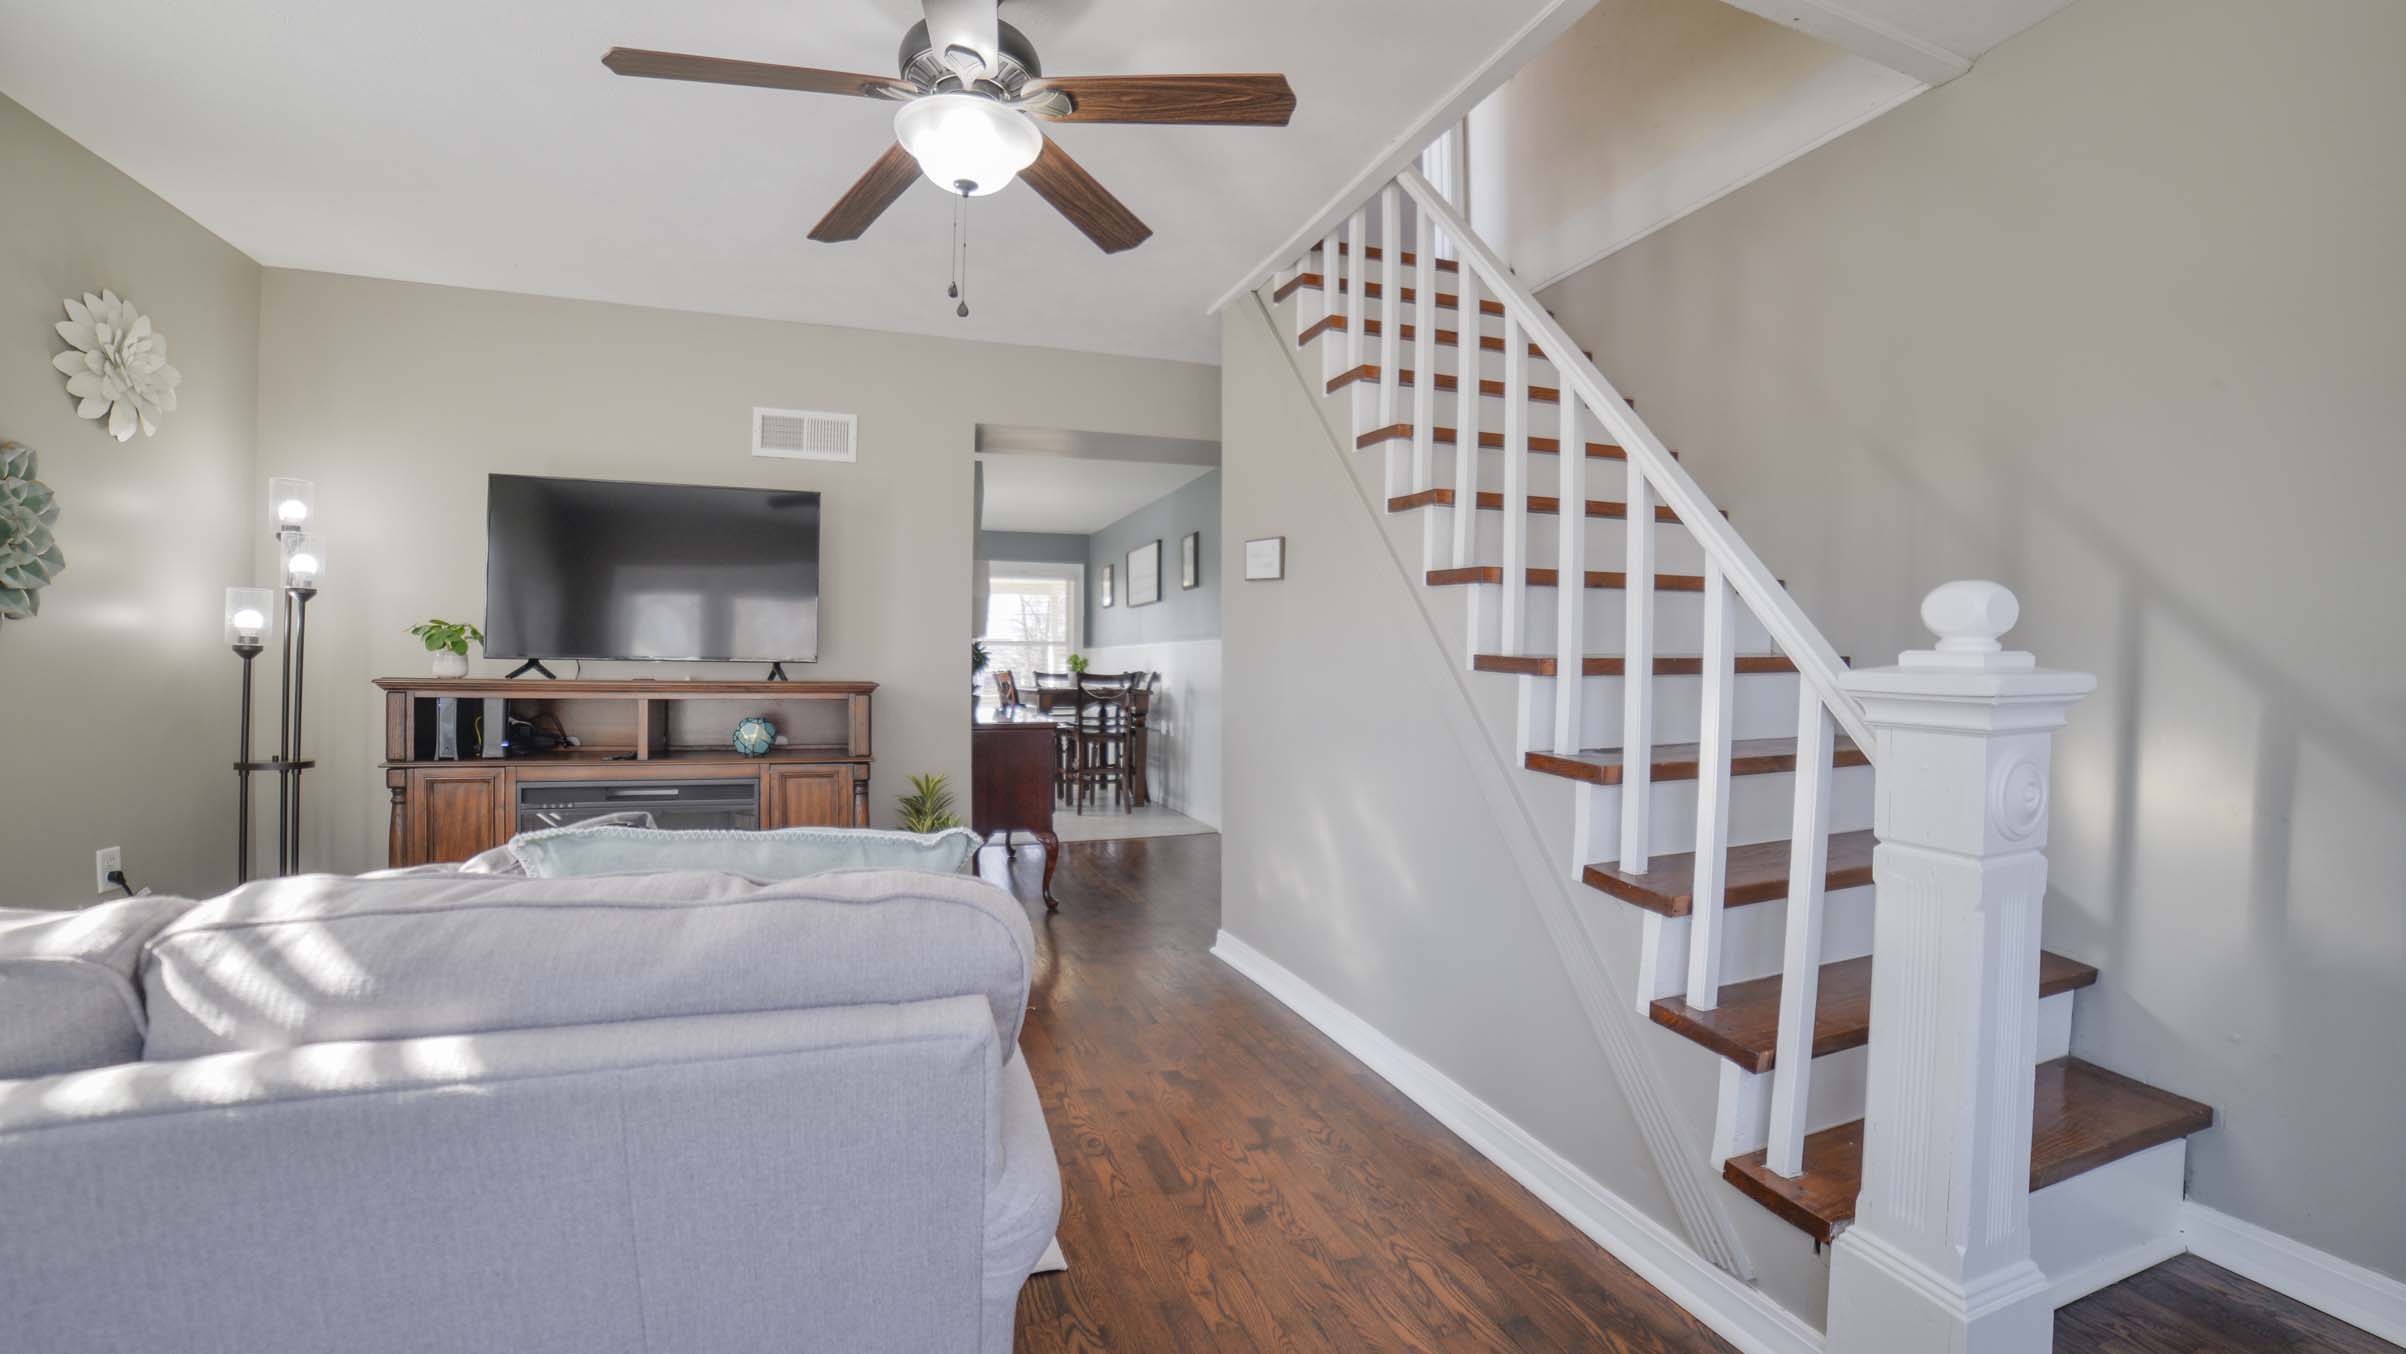 Living room and stairs of the Nurses Station rental located in cape girardeau missouri vacation home rentals, weekly home rentals, travel nurse housing